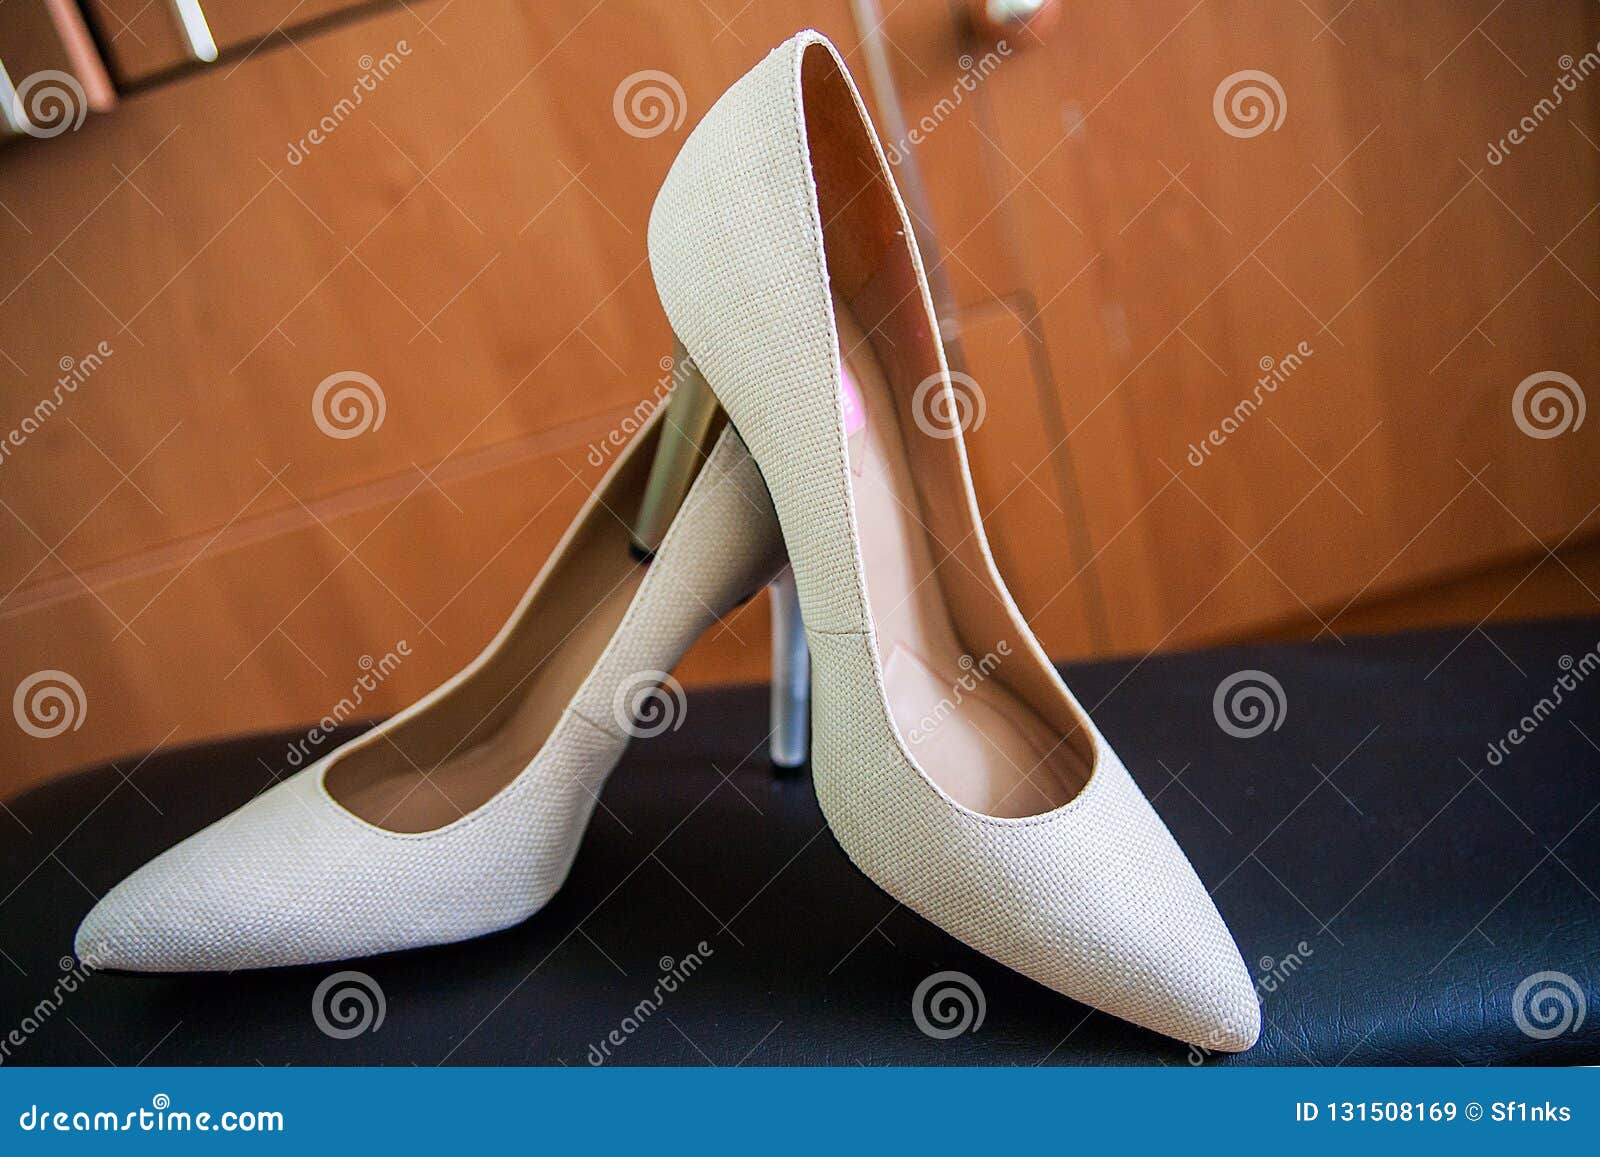 Brides White High Heel Shoes on the Couch Stock Image - Image of girl ...